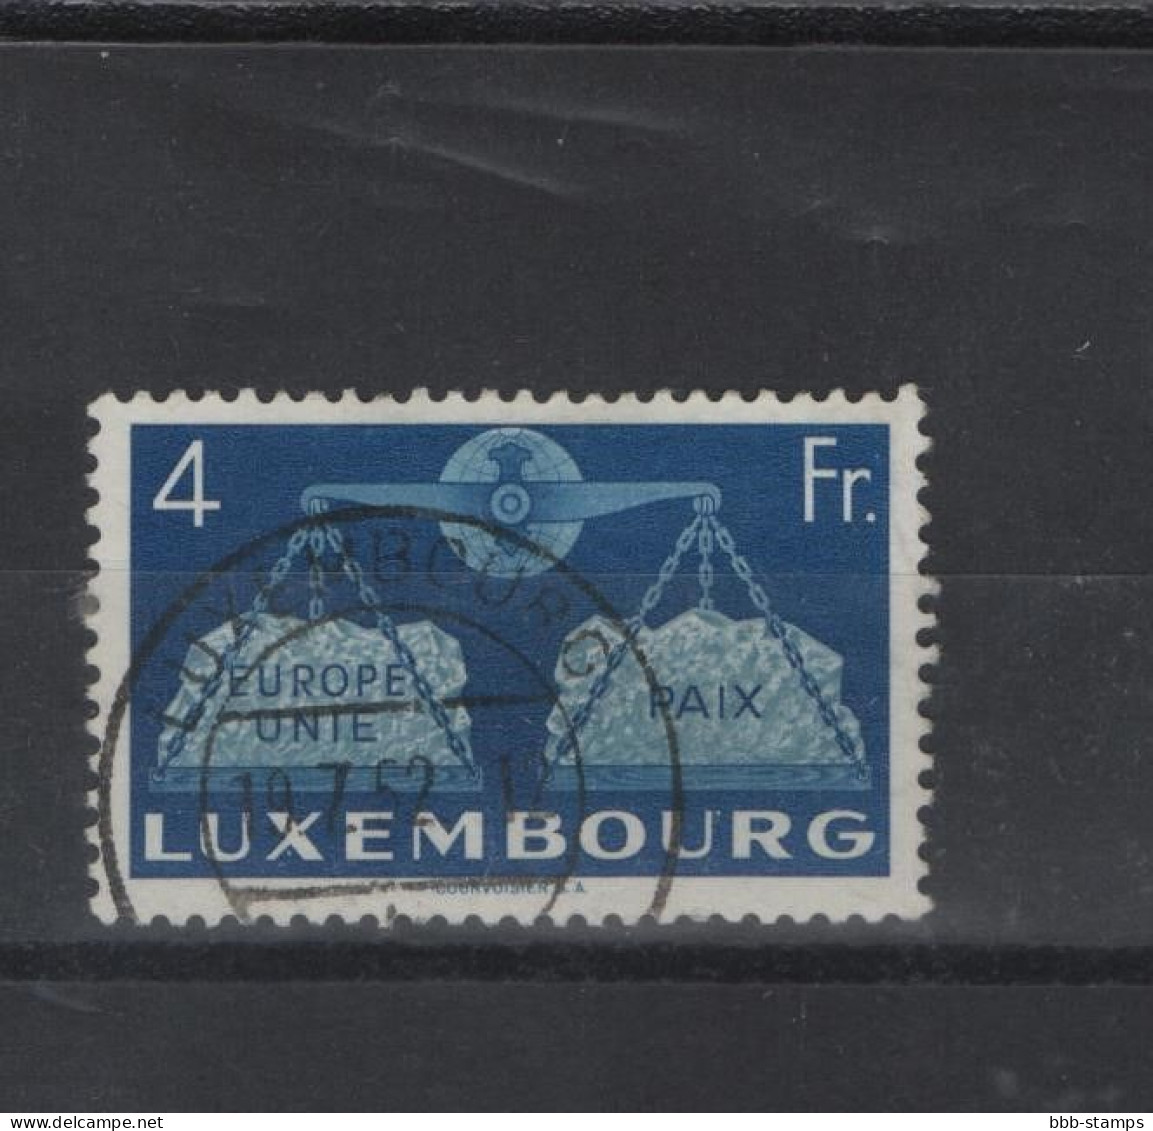 Luxemburg Michel Cat.No.  Used 483 - Used Stamps